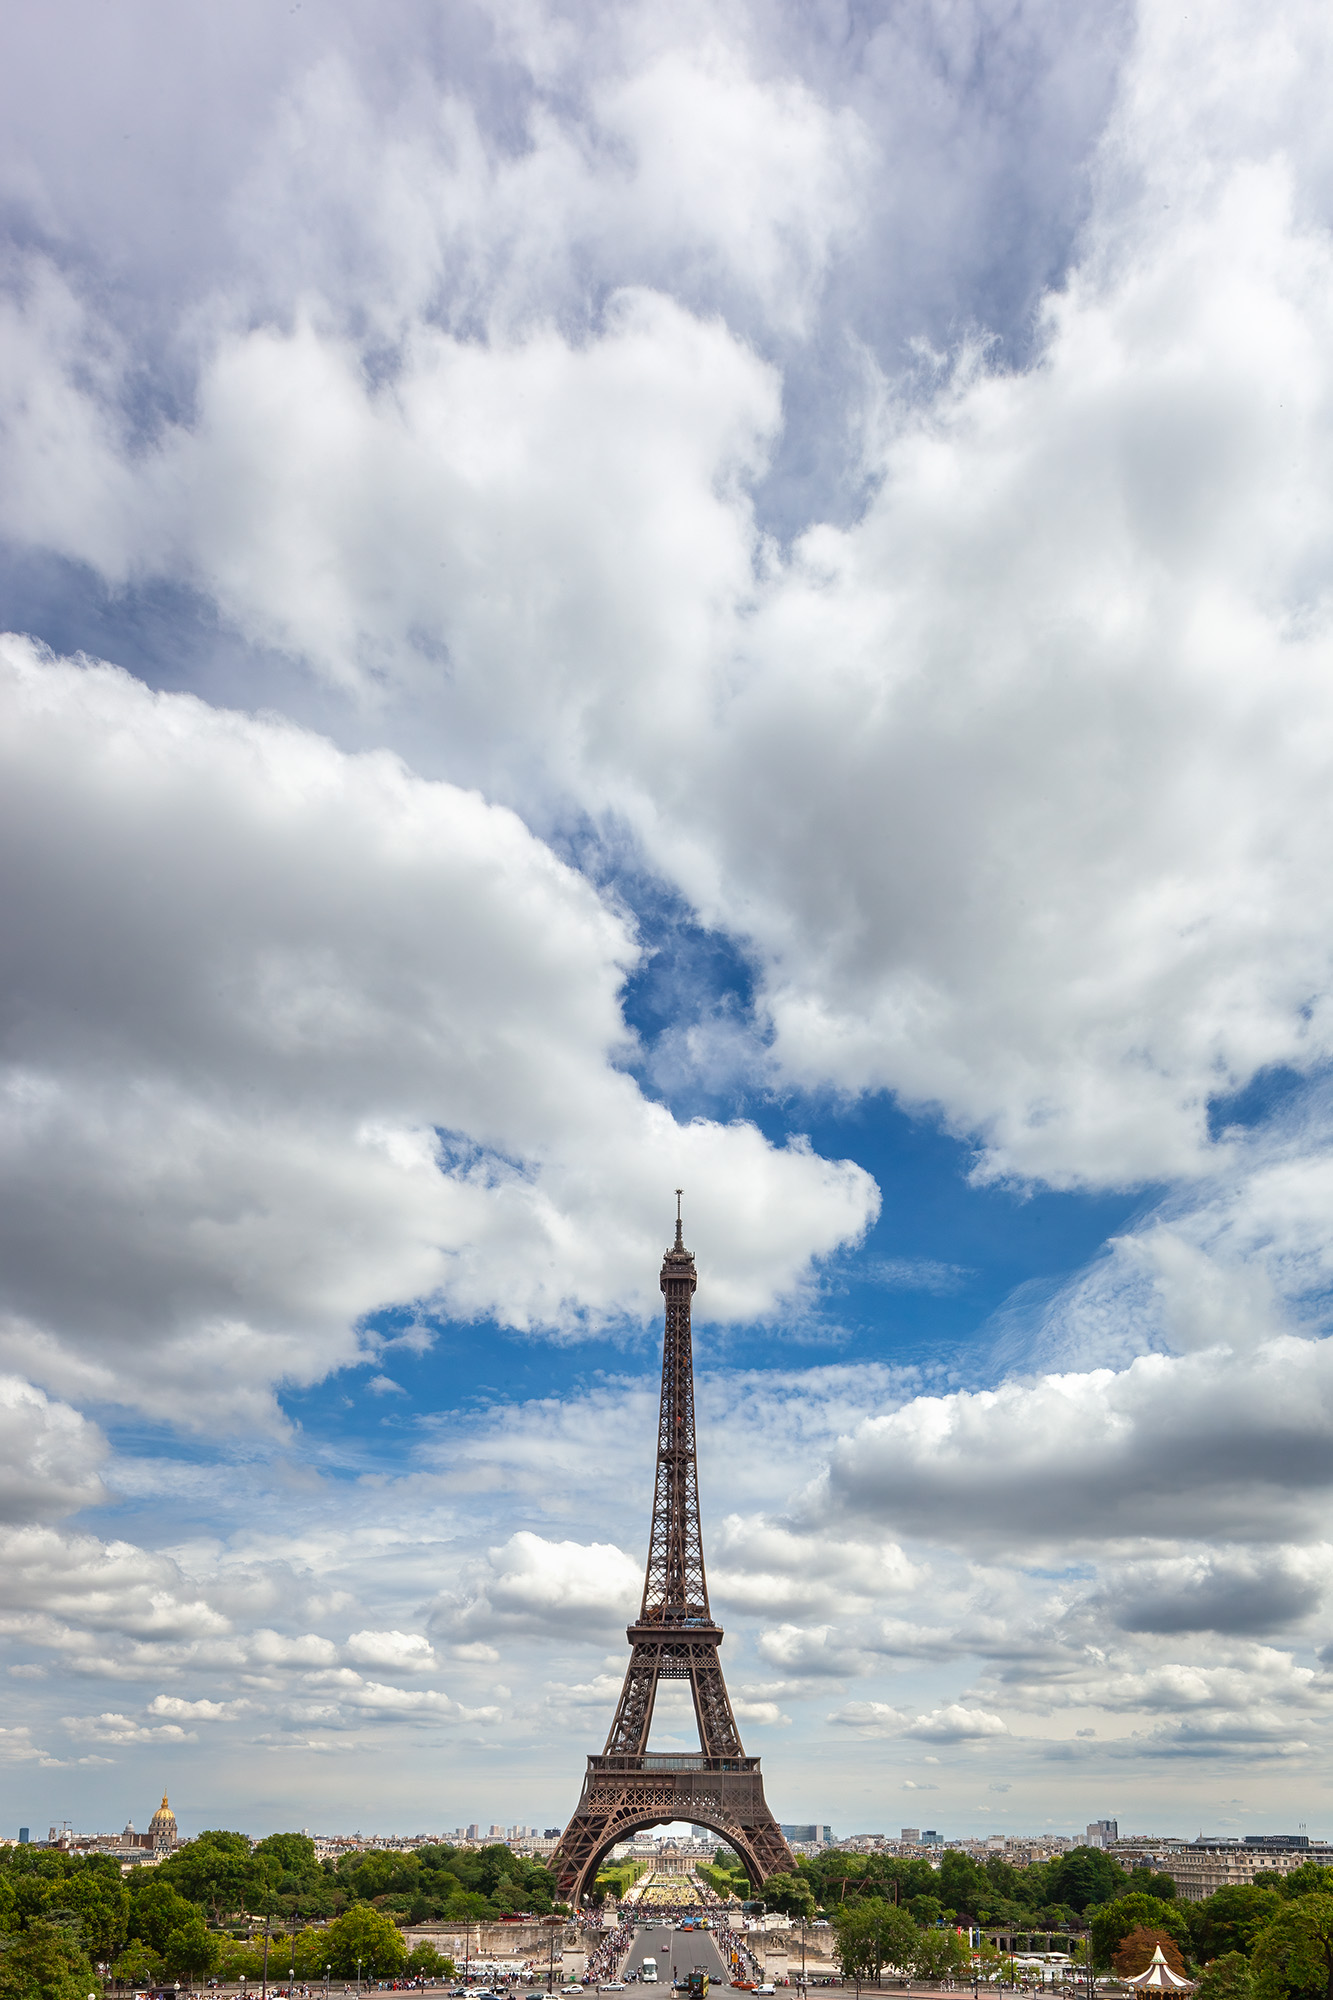 "Eiffel Tower Under Dramatic Skies" showcases the iconic Parisian landmark as if it were a toy model, nestled in the bottom third...